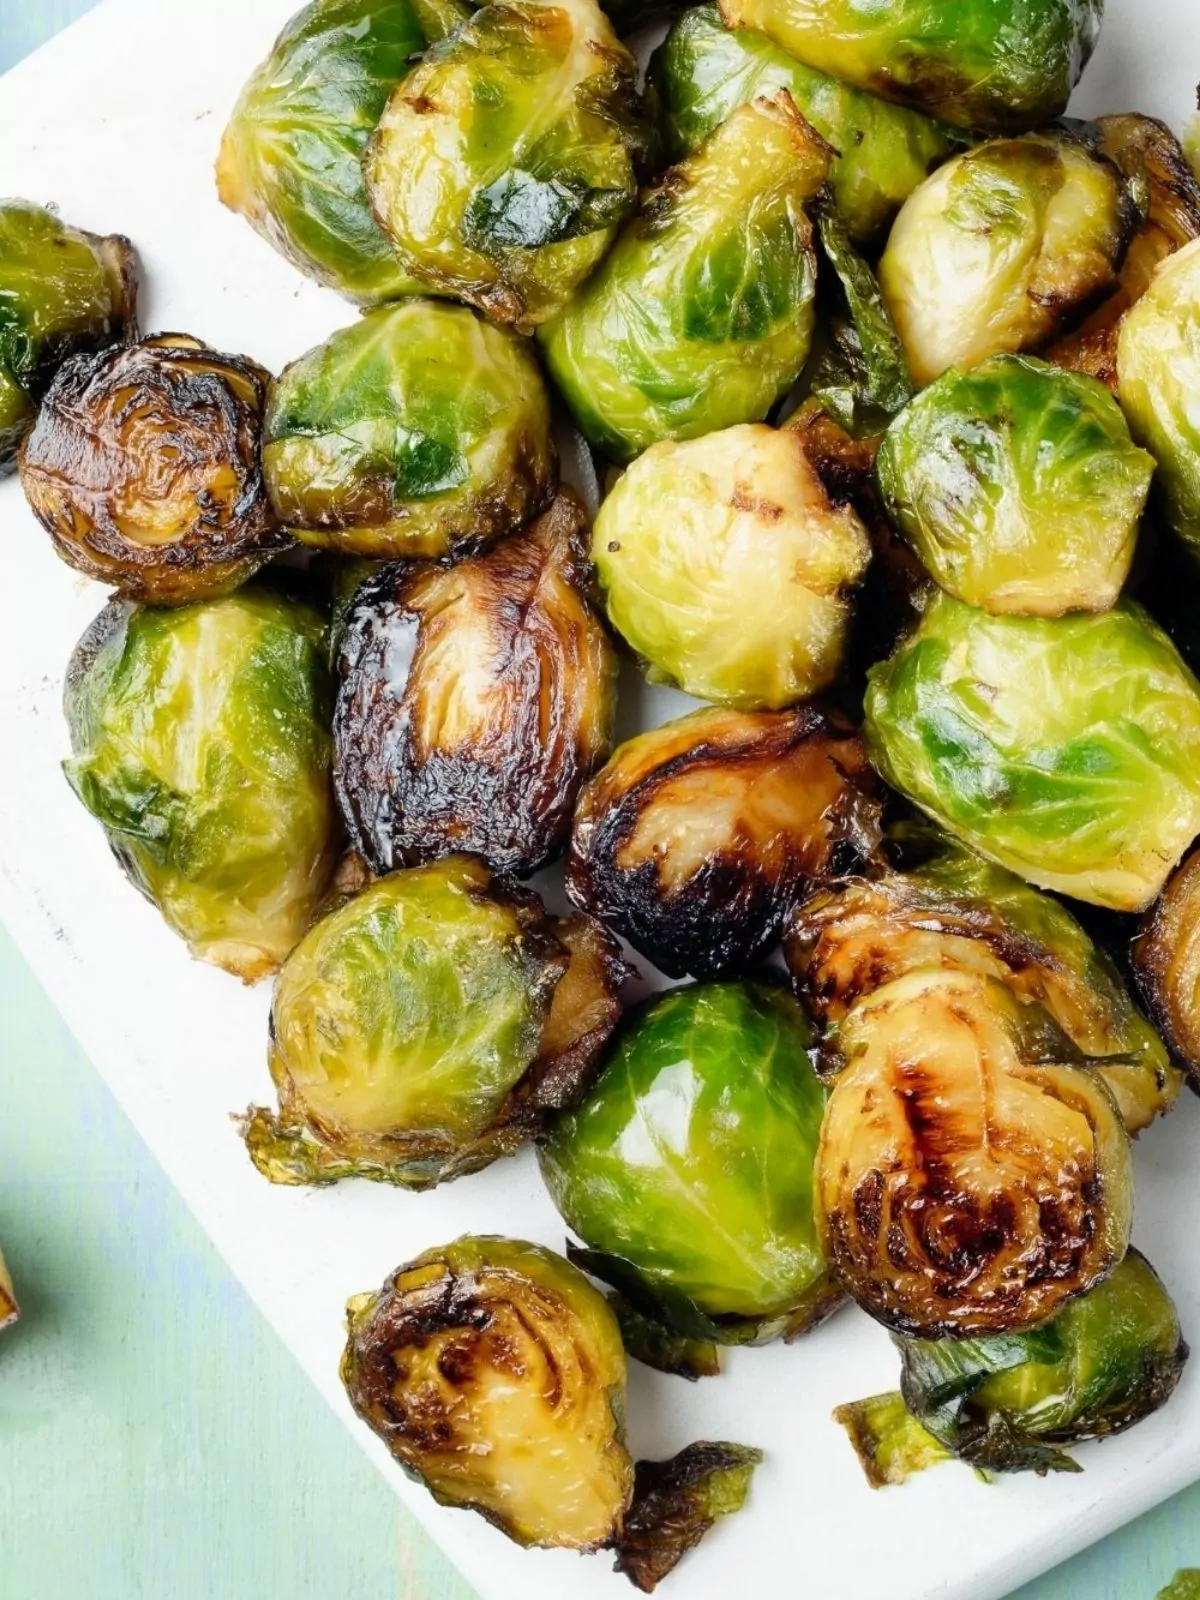 Carmelized Brussels sprouts on white plate served.